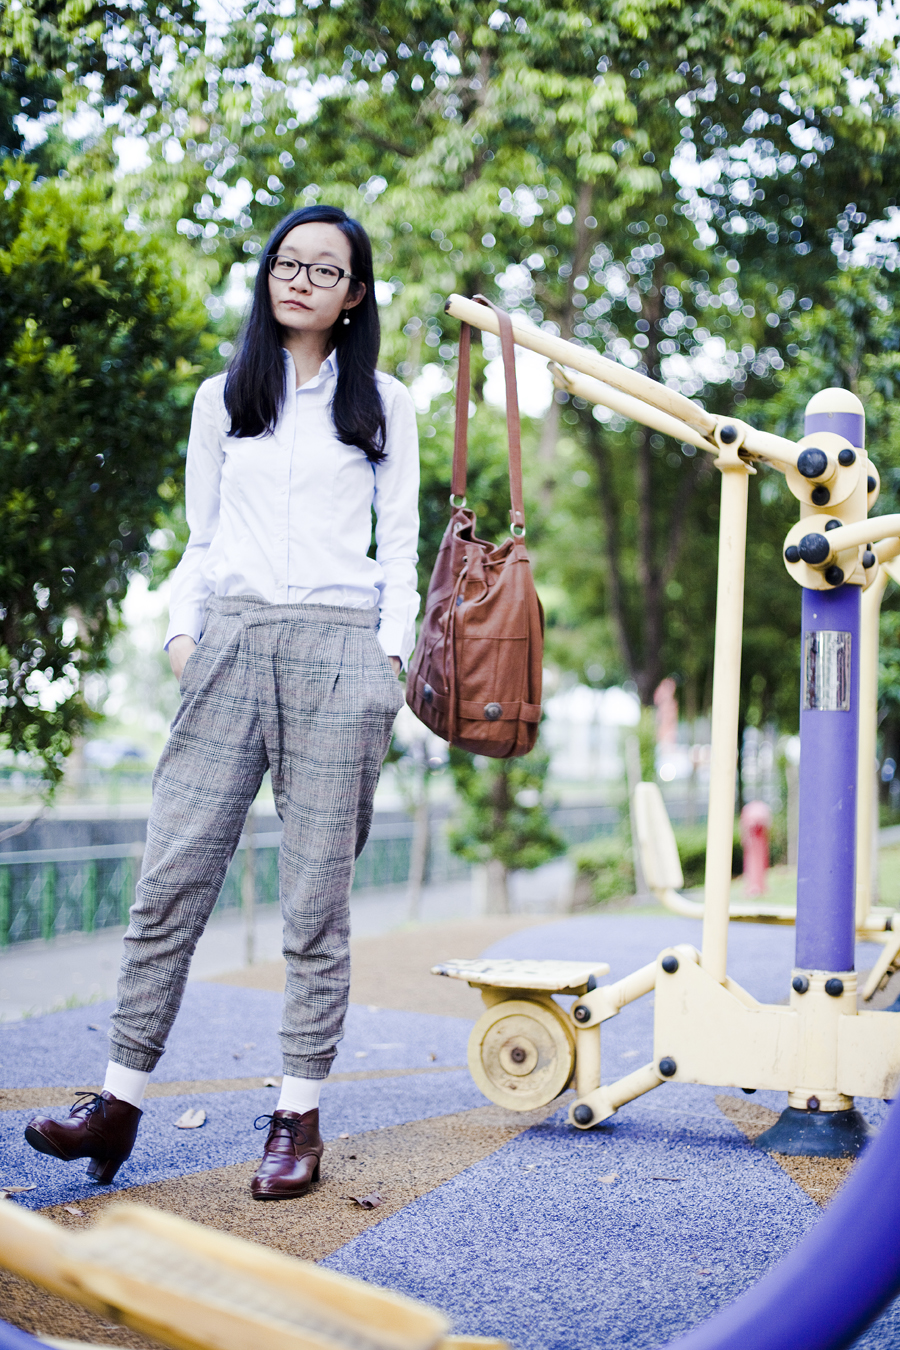 Outfit of the day (#ootd): Gap black-rimmed glasses, G2000 blouse, Zara plaid pants, Taobao oxford heels, Gentlefawn leather bag.